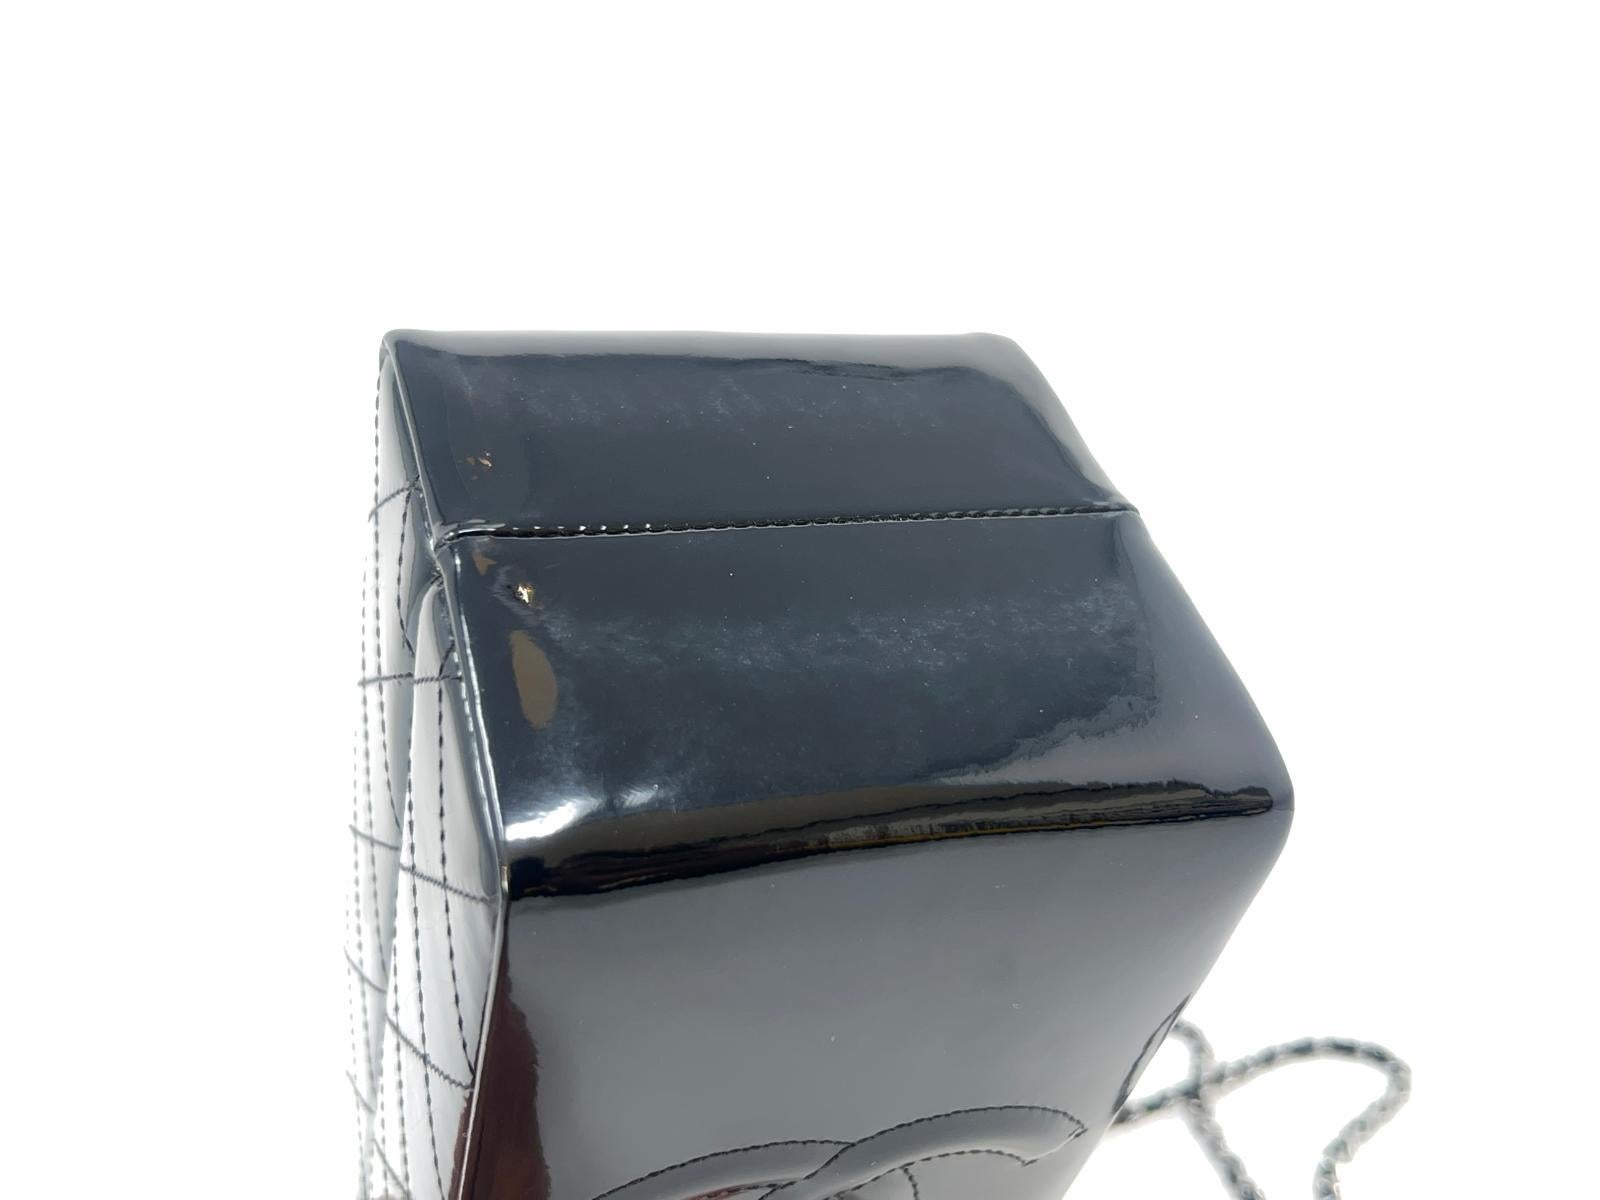 Chanel Black Patent Milk Carton Bag Silver Hardware Fall / Winter 2014 In New Condition For Sale In Baleares, Baleares